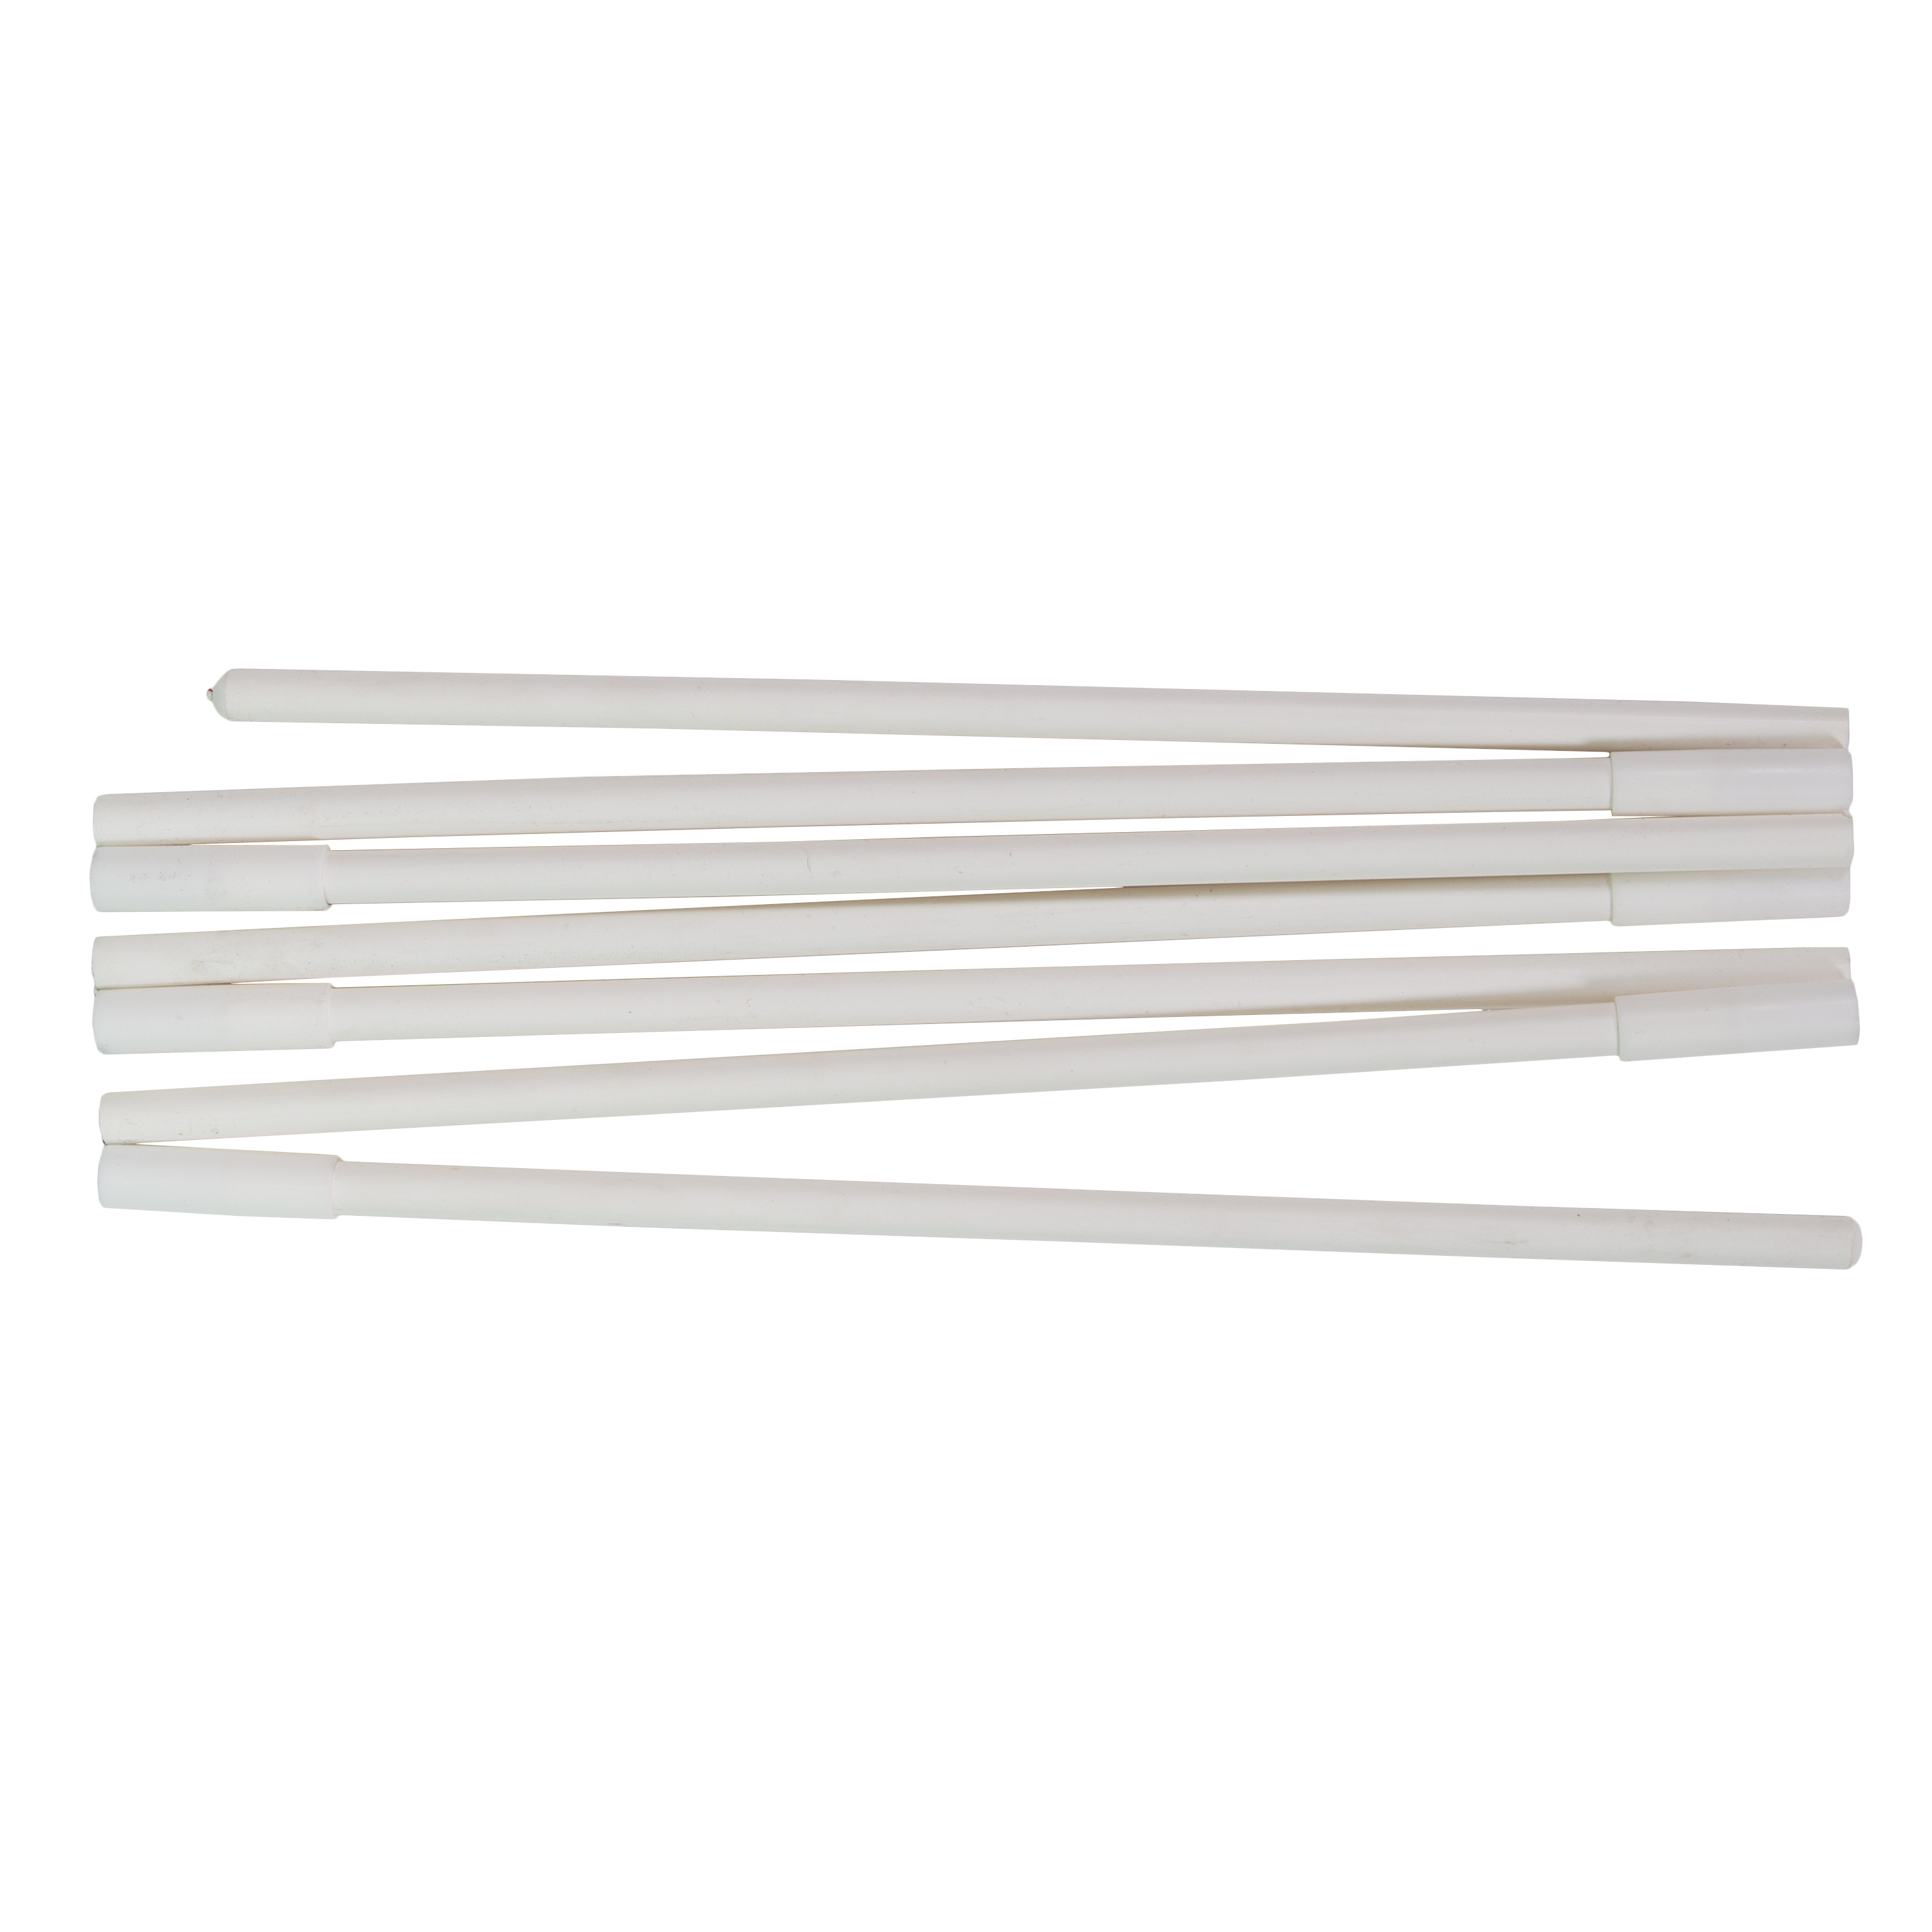 102 Inch PVC Poles - Pacific Play Tents